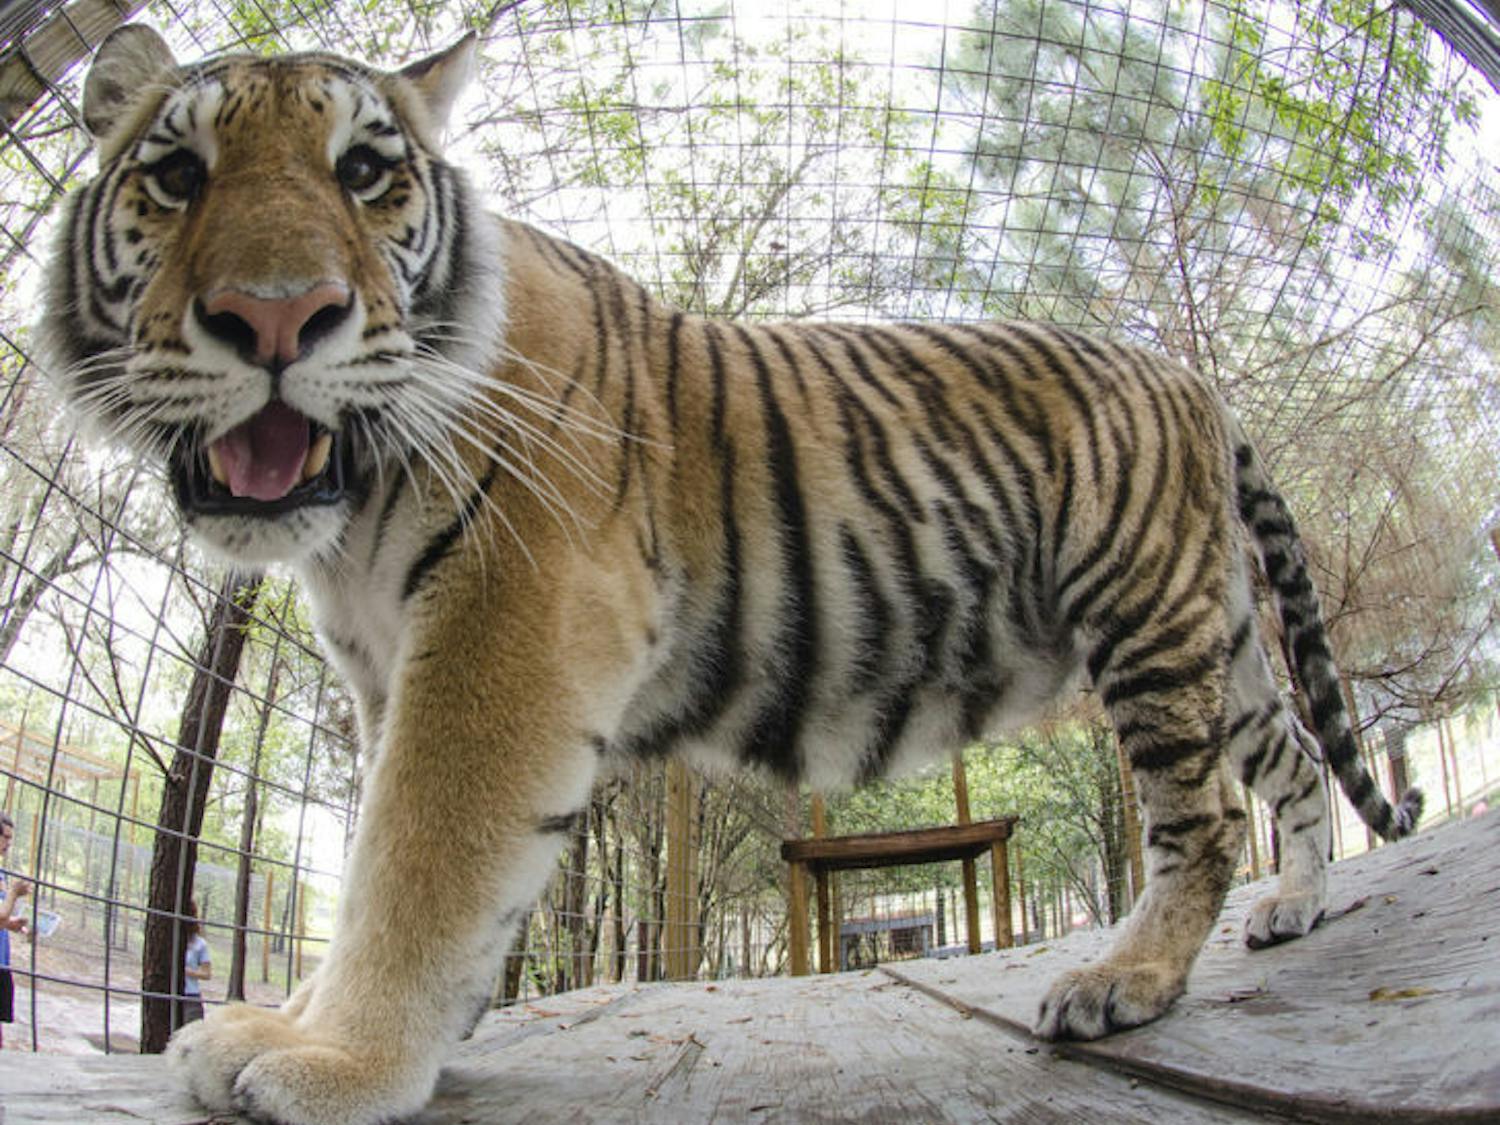 A curious tiger looks at the camera in the Carson Springs Wildlife Conservation Foundation last year. Select zoos have asked patrons to avoid wearing animal prints as they may confuse the animals.